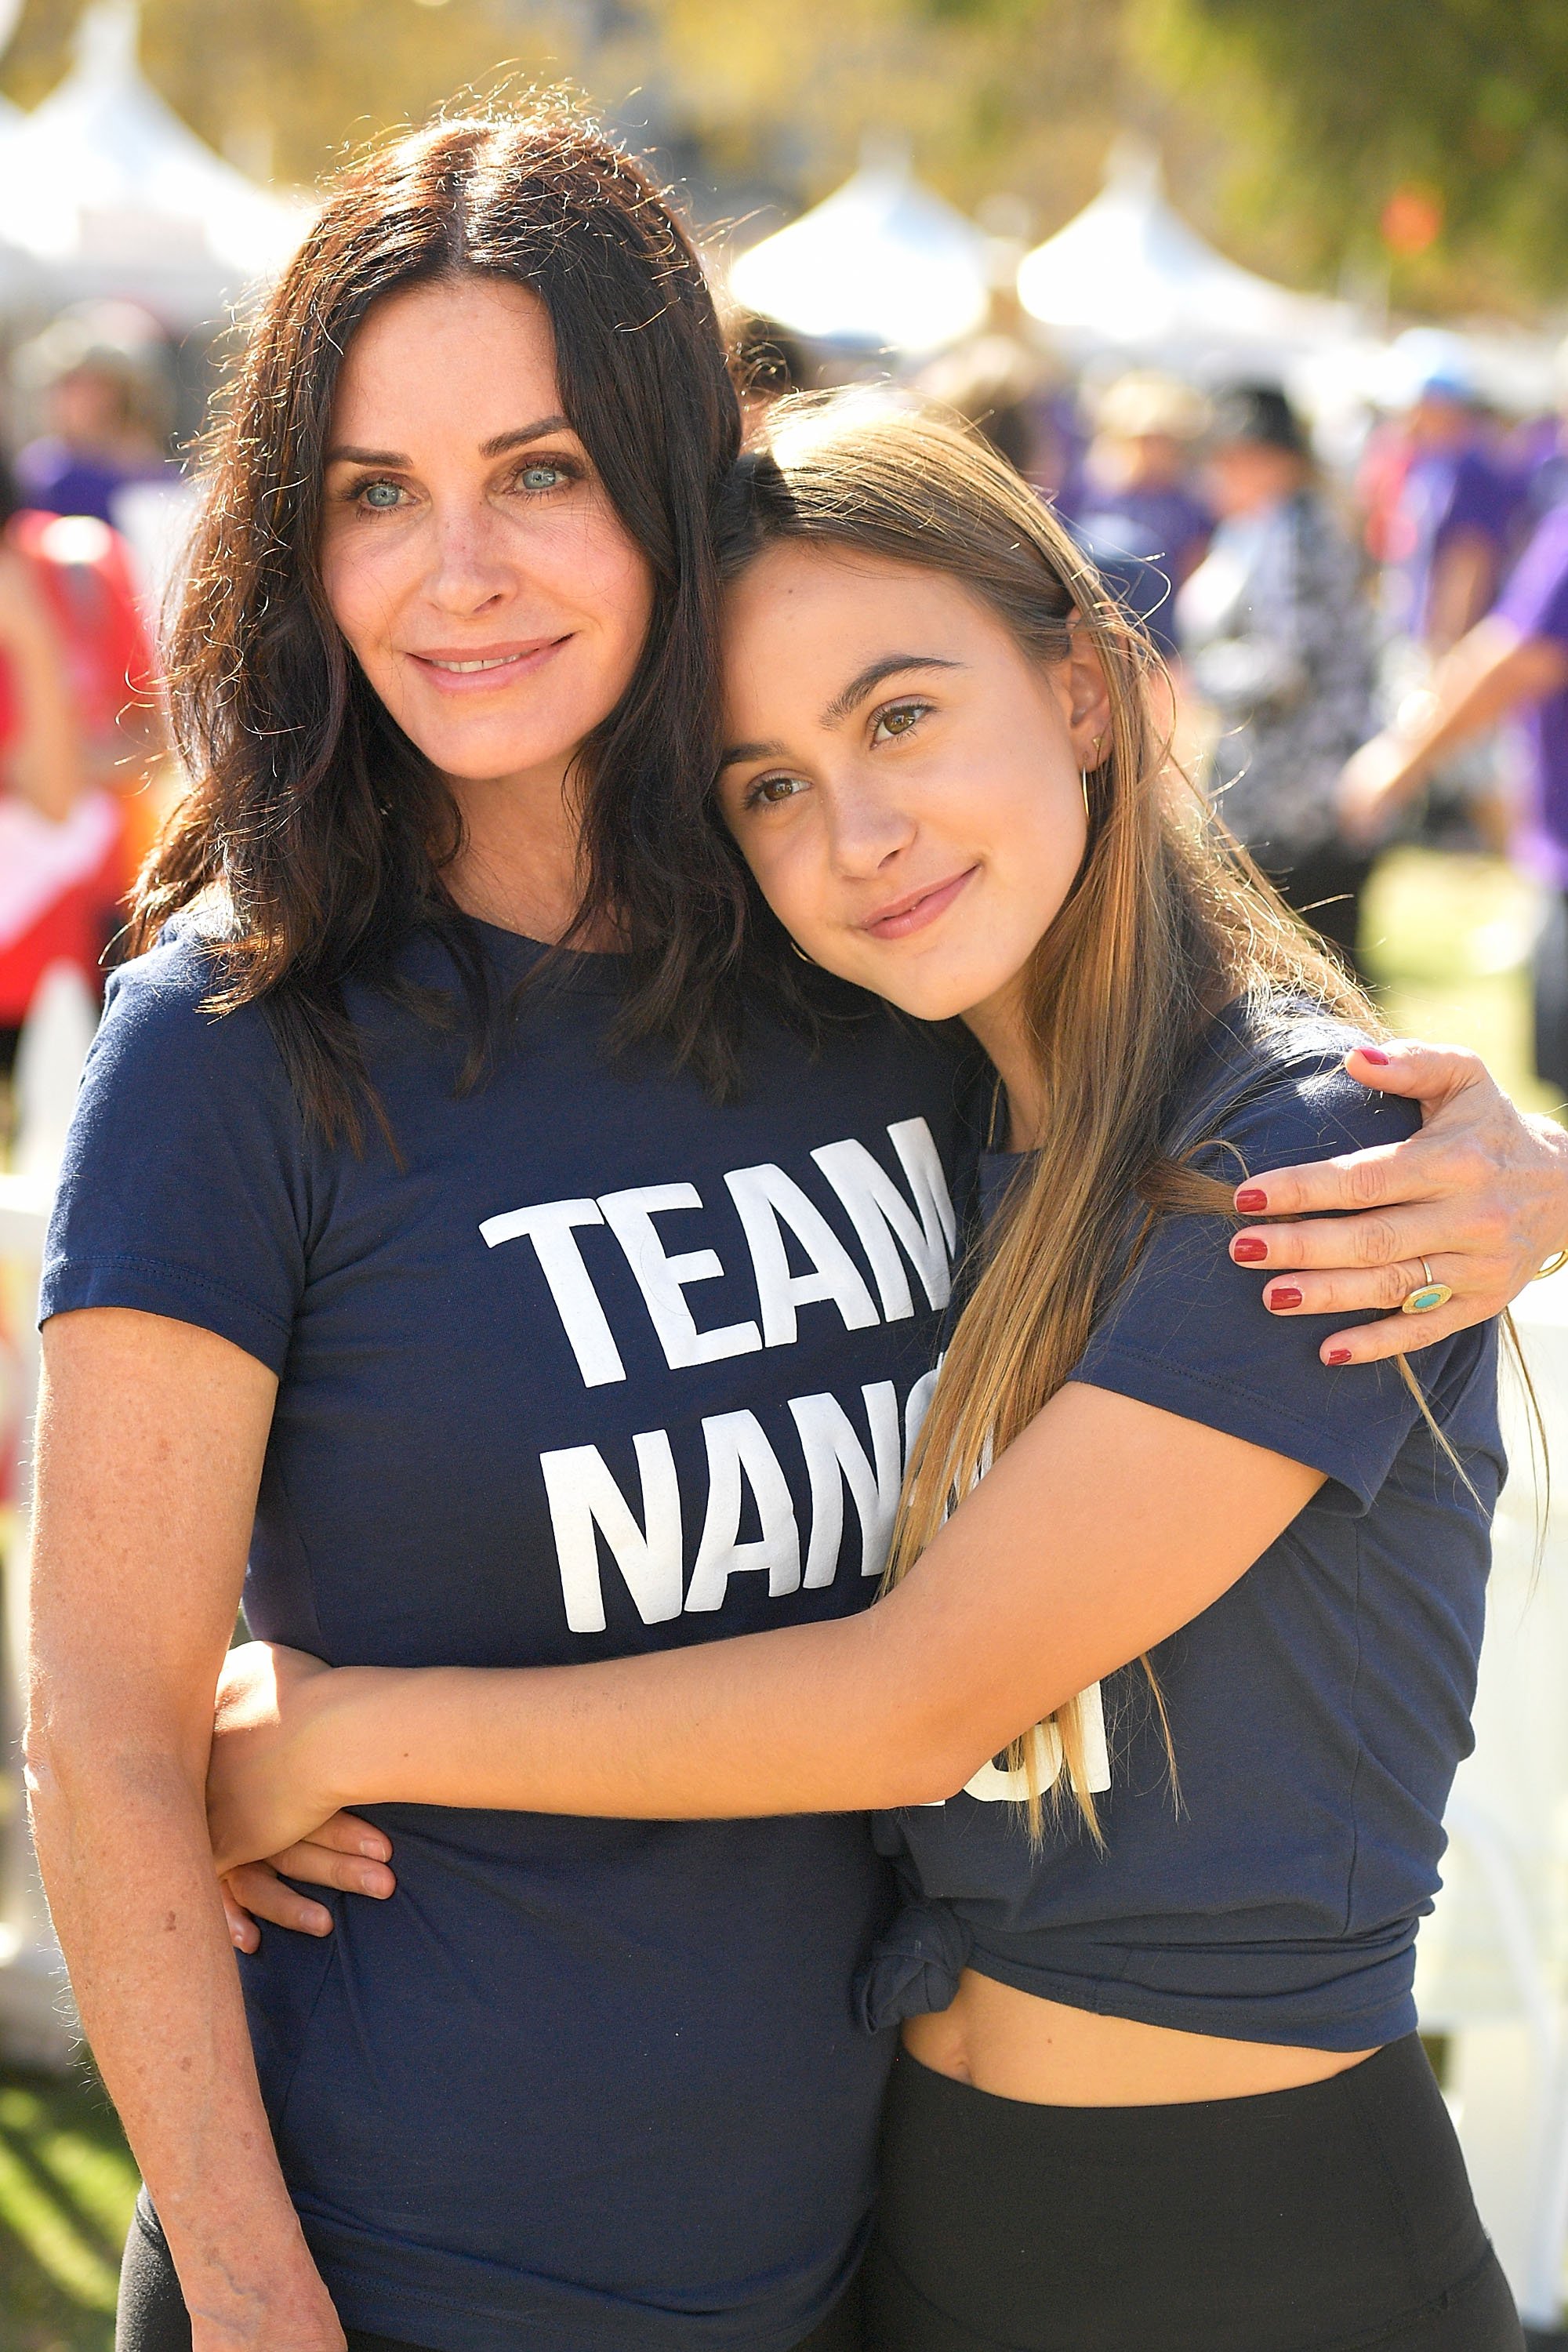 Courteney Cox and her daughter Coco Arquette at the 15th Annual LA County Walk to Defeat ALS at Exposition Park, 2017, Los Angeles, California. | Photo: Getty Images